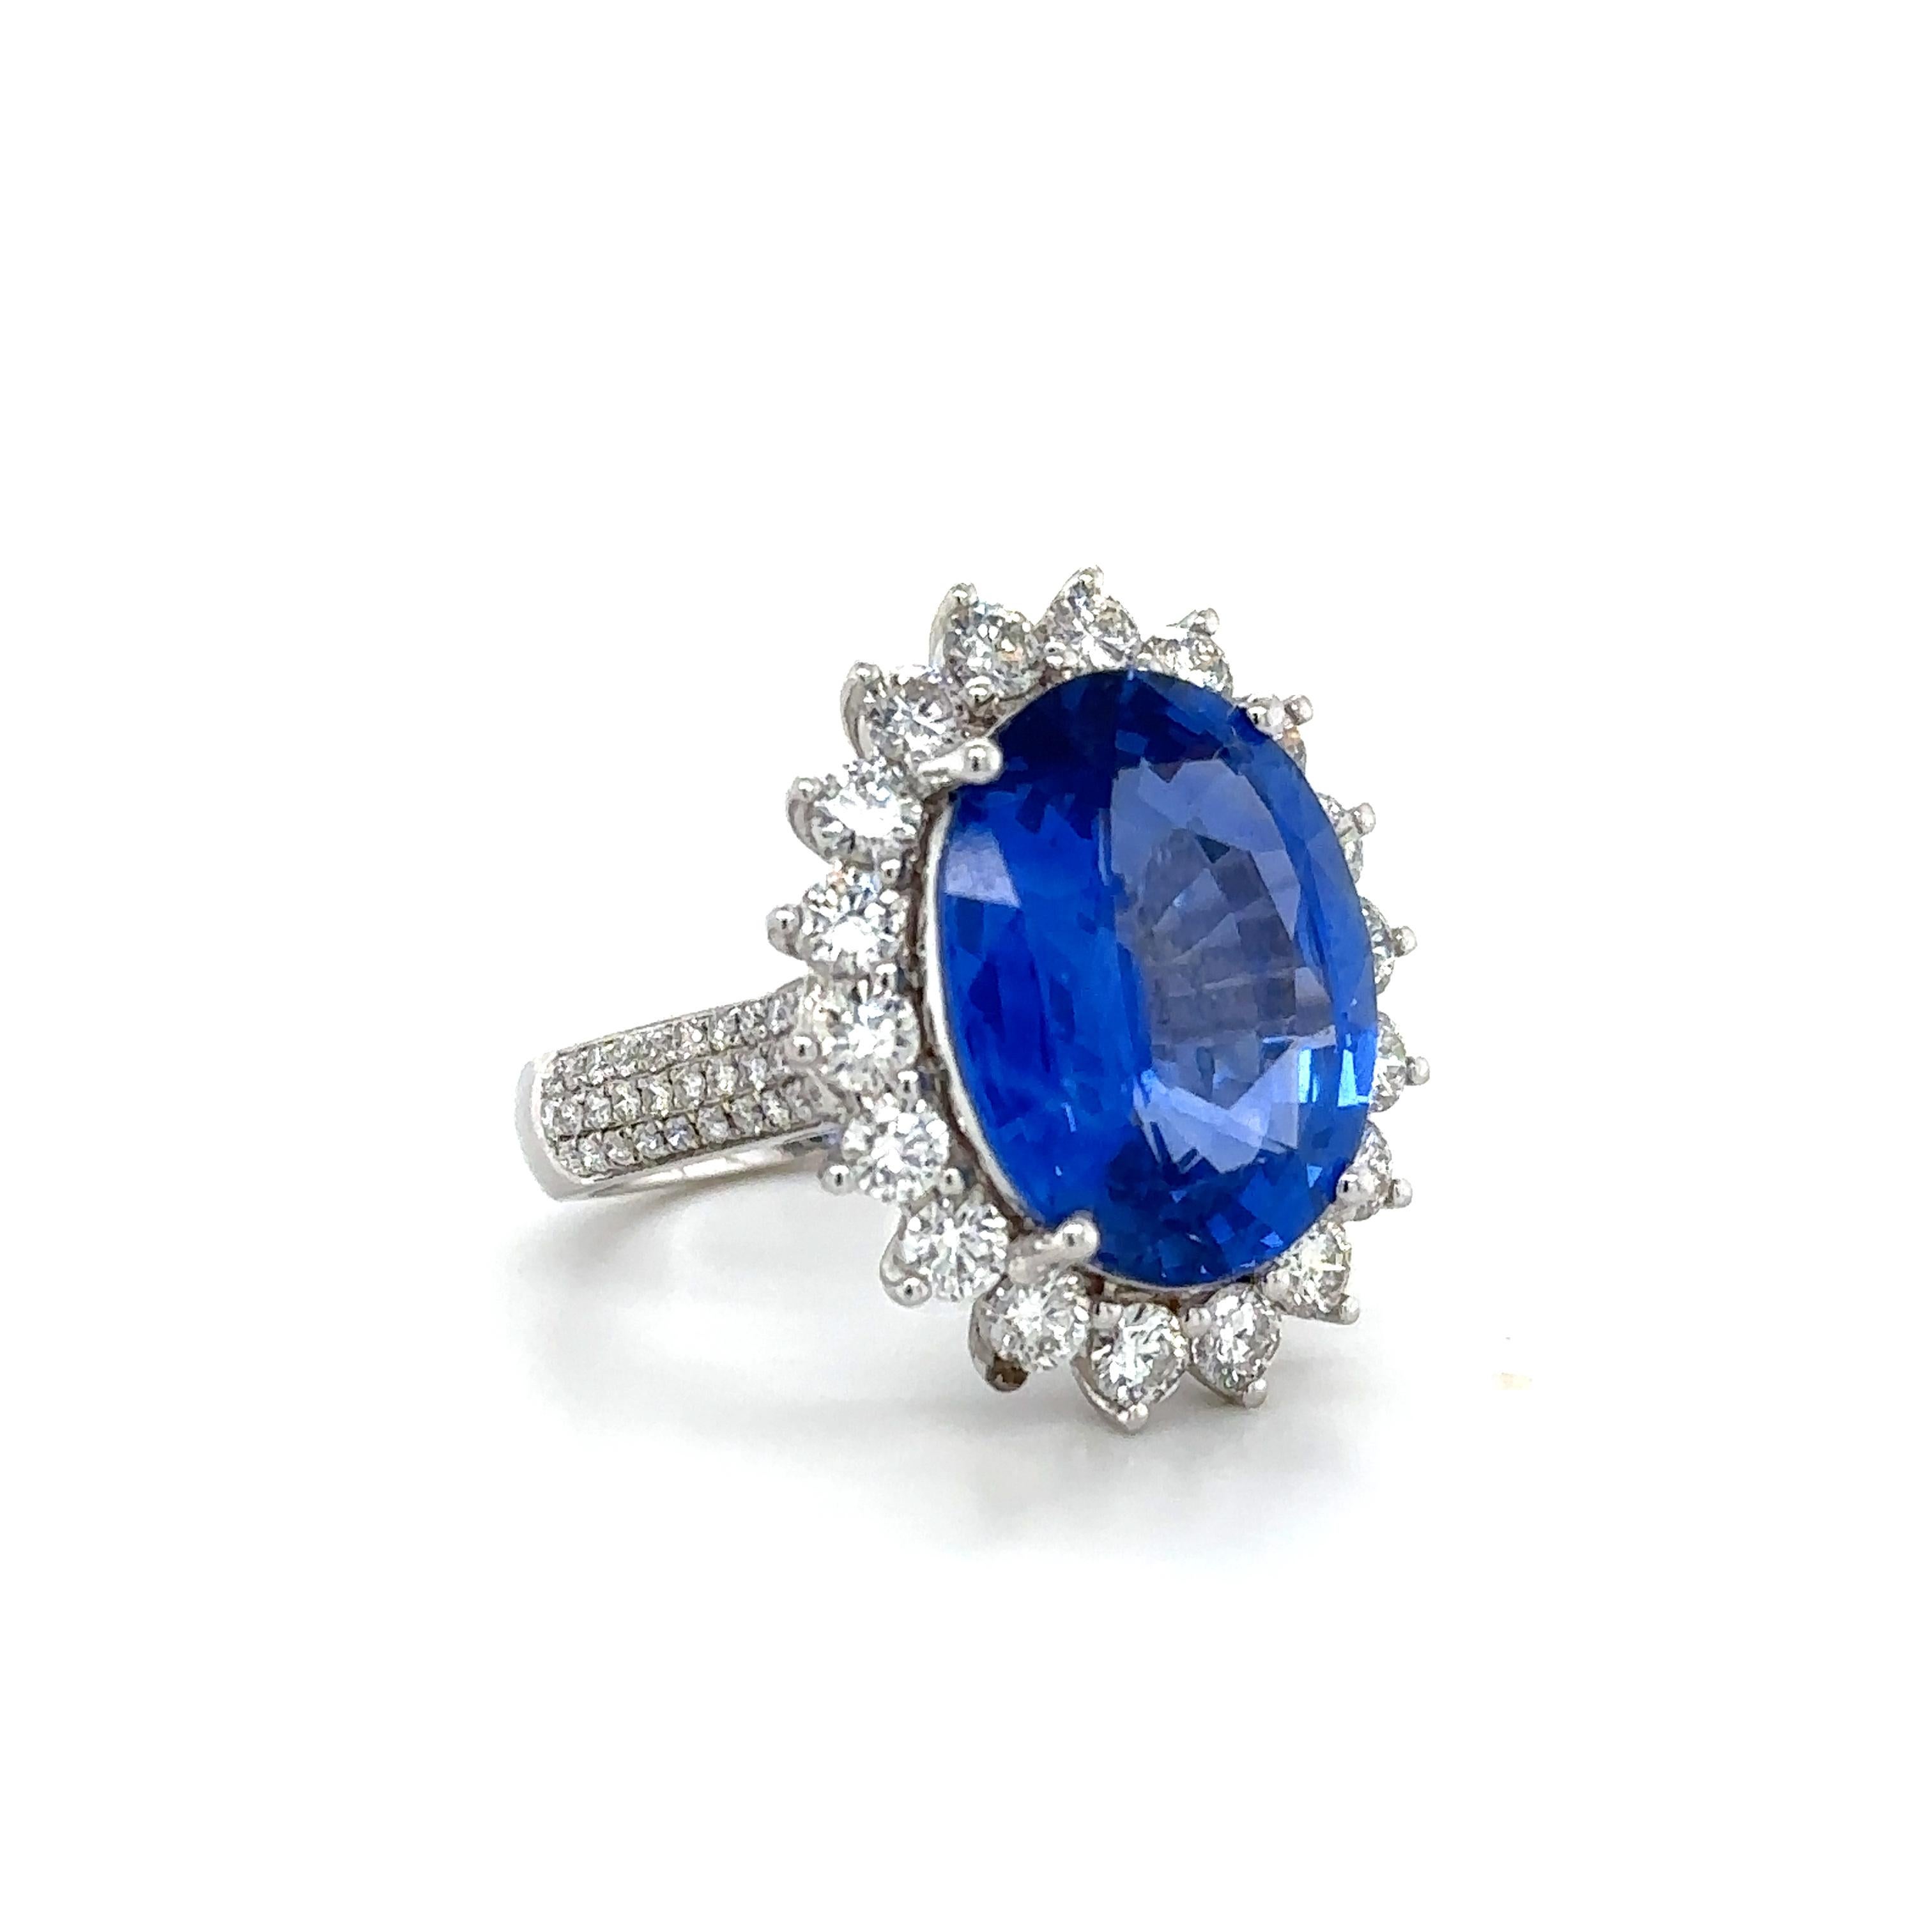 10.36 Carat GRS Certified Sapphire Diamond Ring For Sale 3